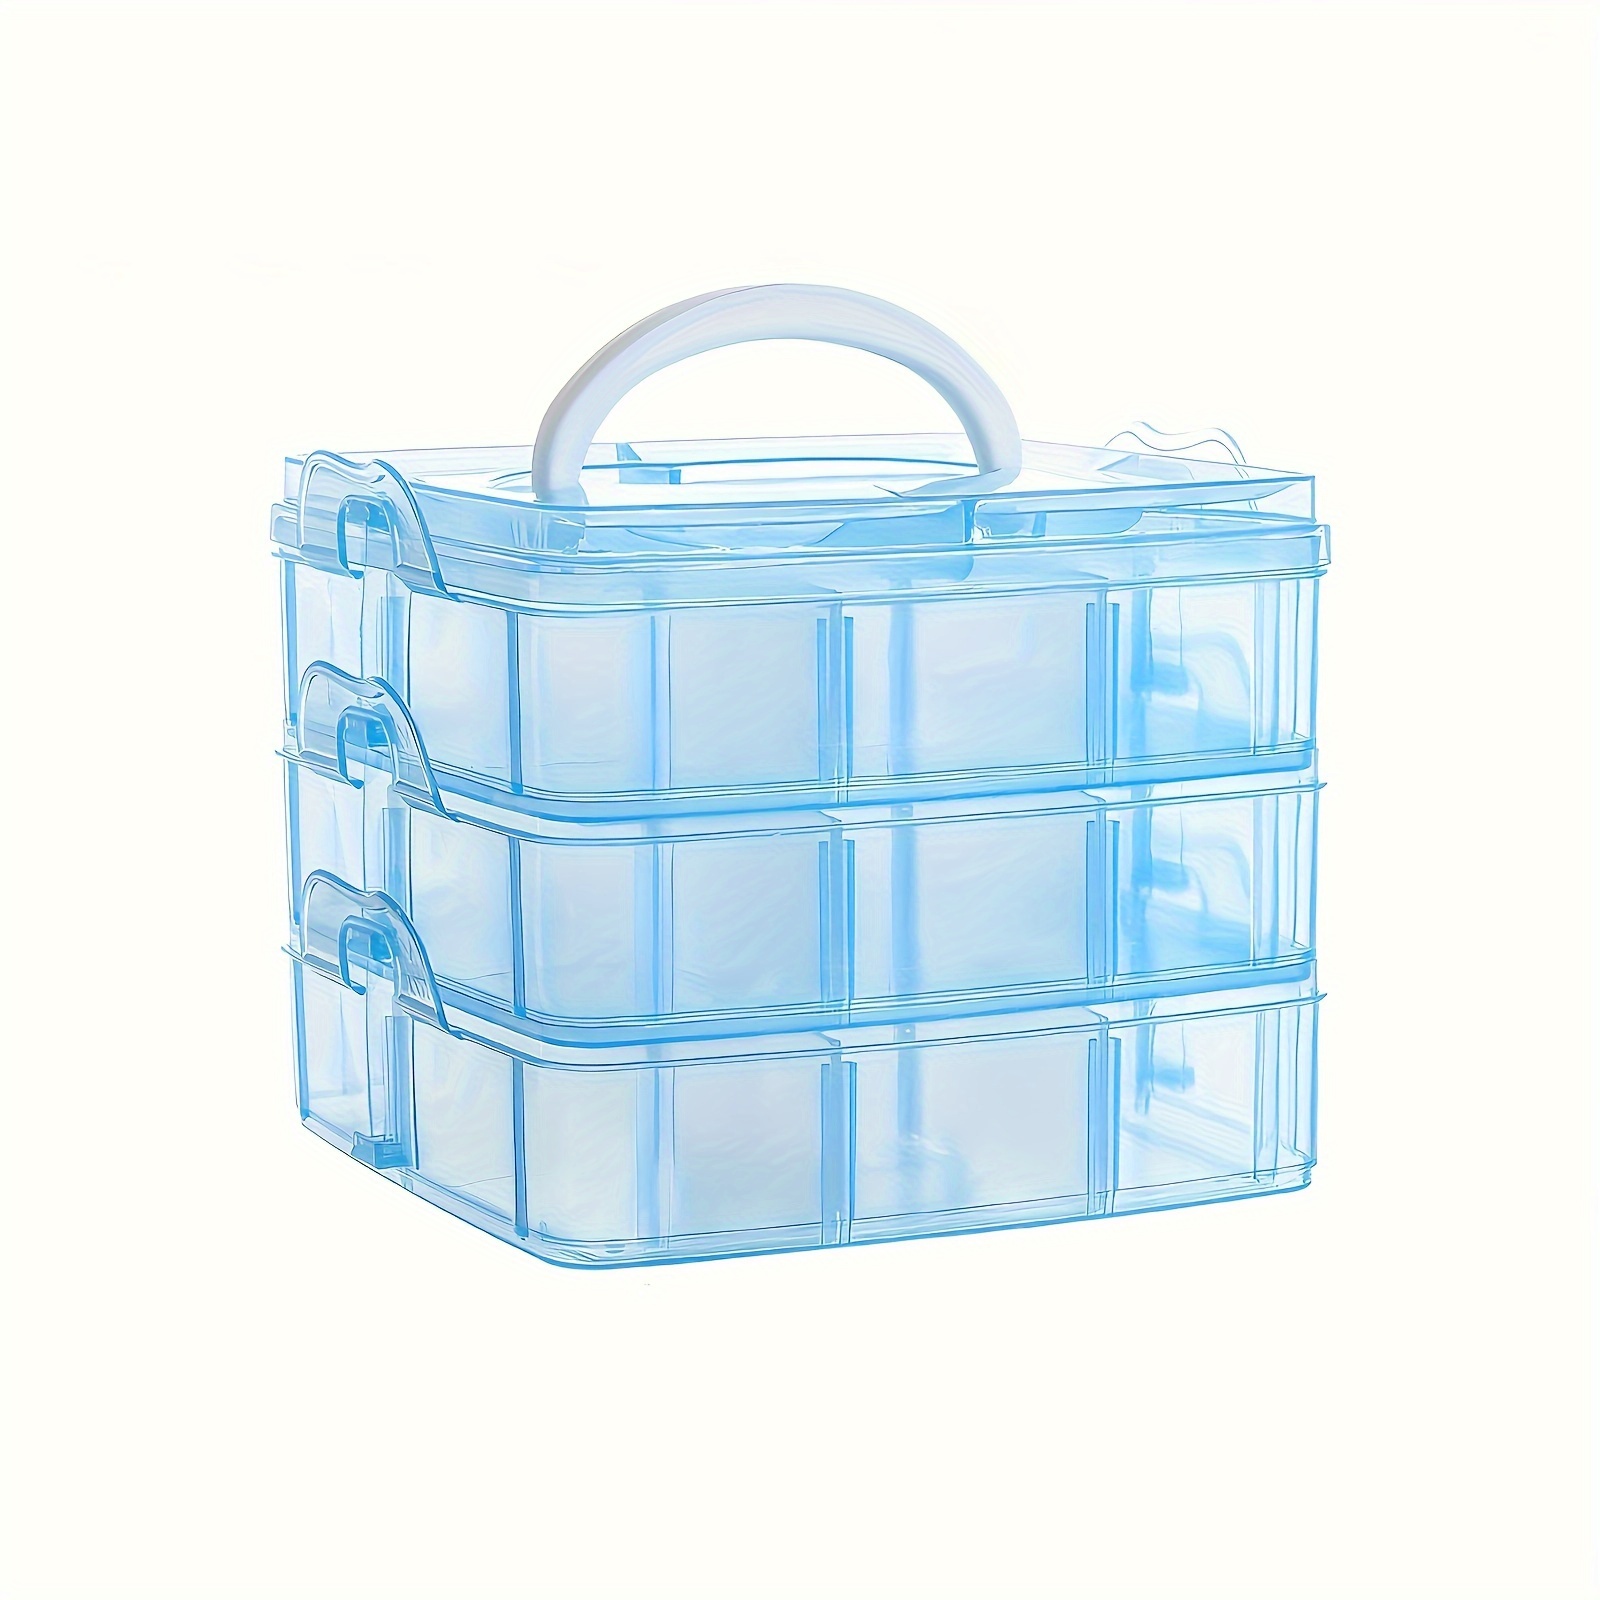 

1pc 24 Grid Multi-color Plastic Jewelry Box, Decoration Box, Craft Storage Box Suitable For Art Diy, Handicrafts, Jewelry, Sewing Supplies, Beads, Etc., 14.99x14.99x11.94cm/5.9x5.9x4.7inches